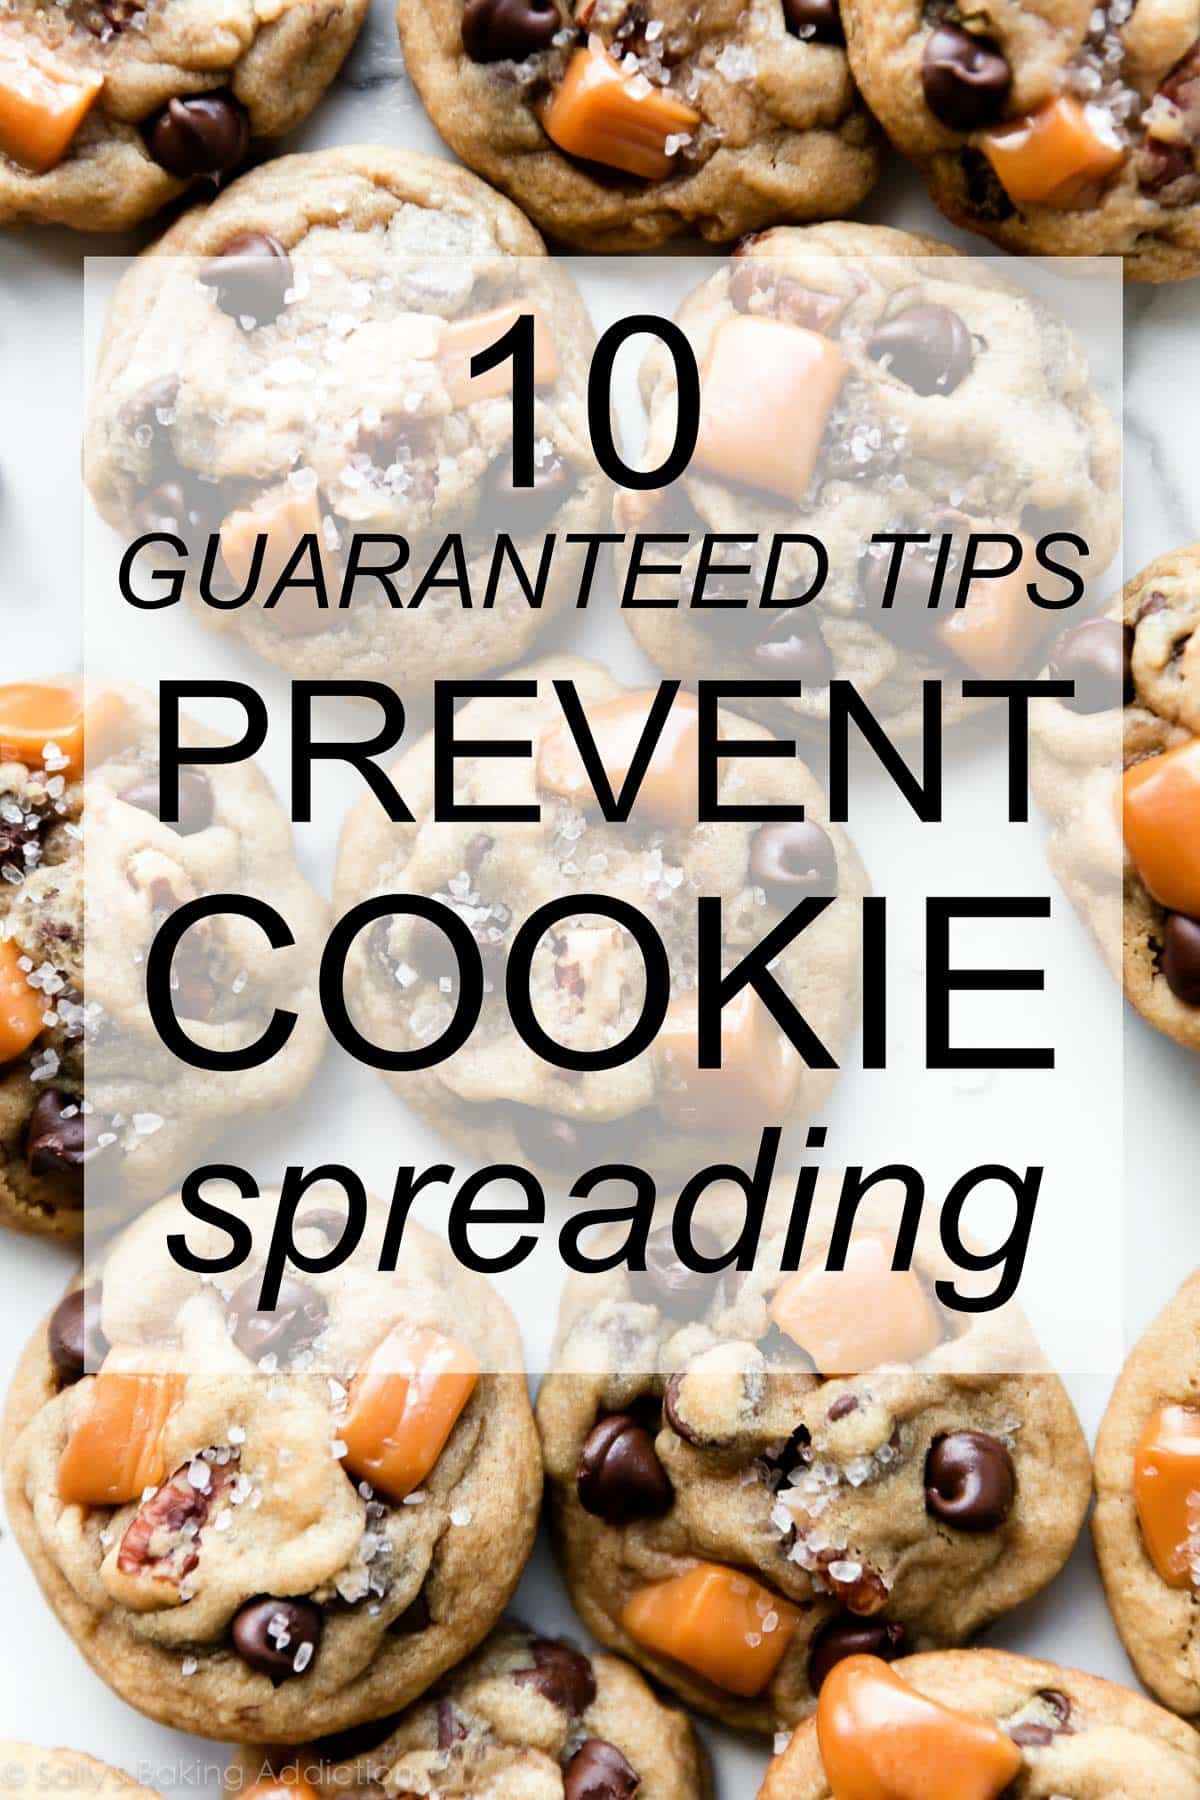 salted caramel pecan chocolate chip cookies with 10 guaranteed tips prevent cookie spreading text overlay